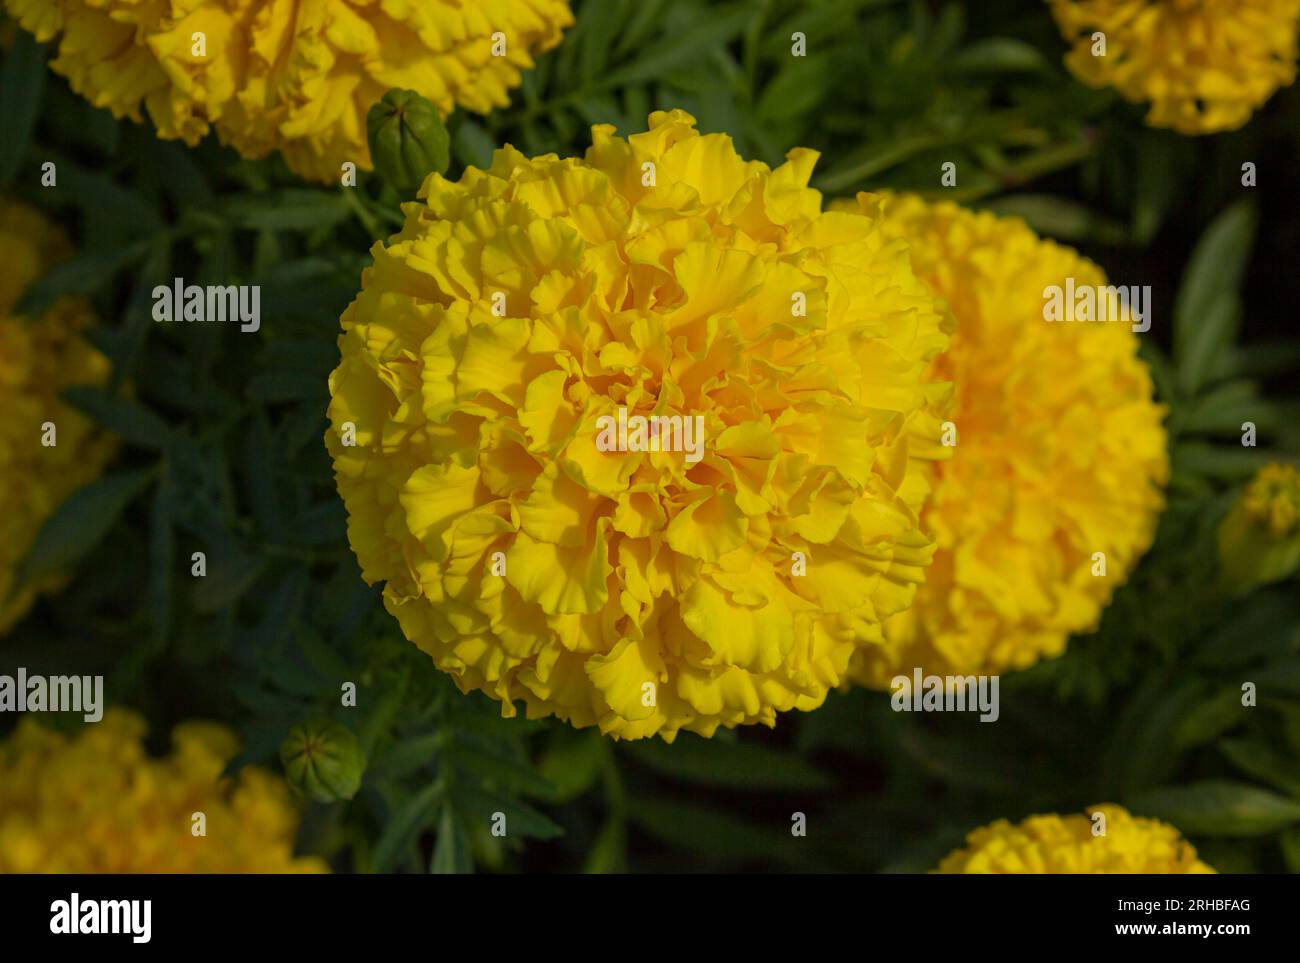 Top view of Beautiful yellow flowers of Tagetes erecta L. or Marigold in the garden. Bud Head of Curly Yellow Marigolds. Stock Photo